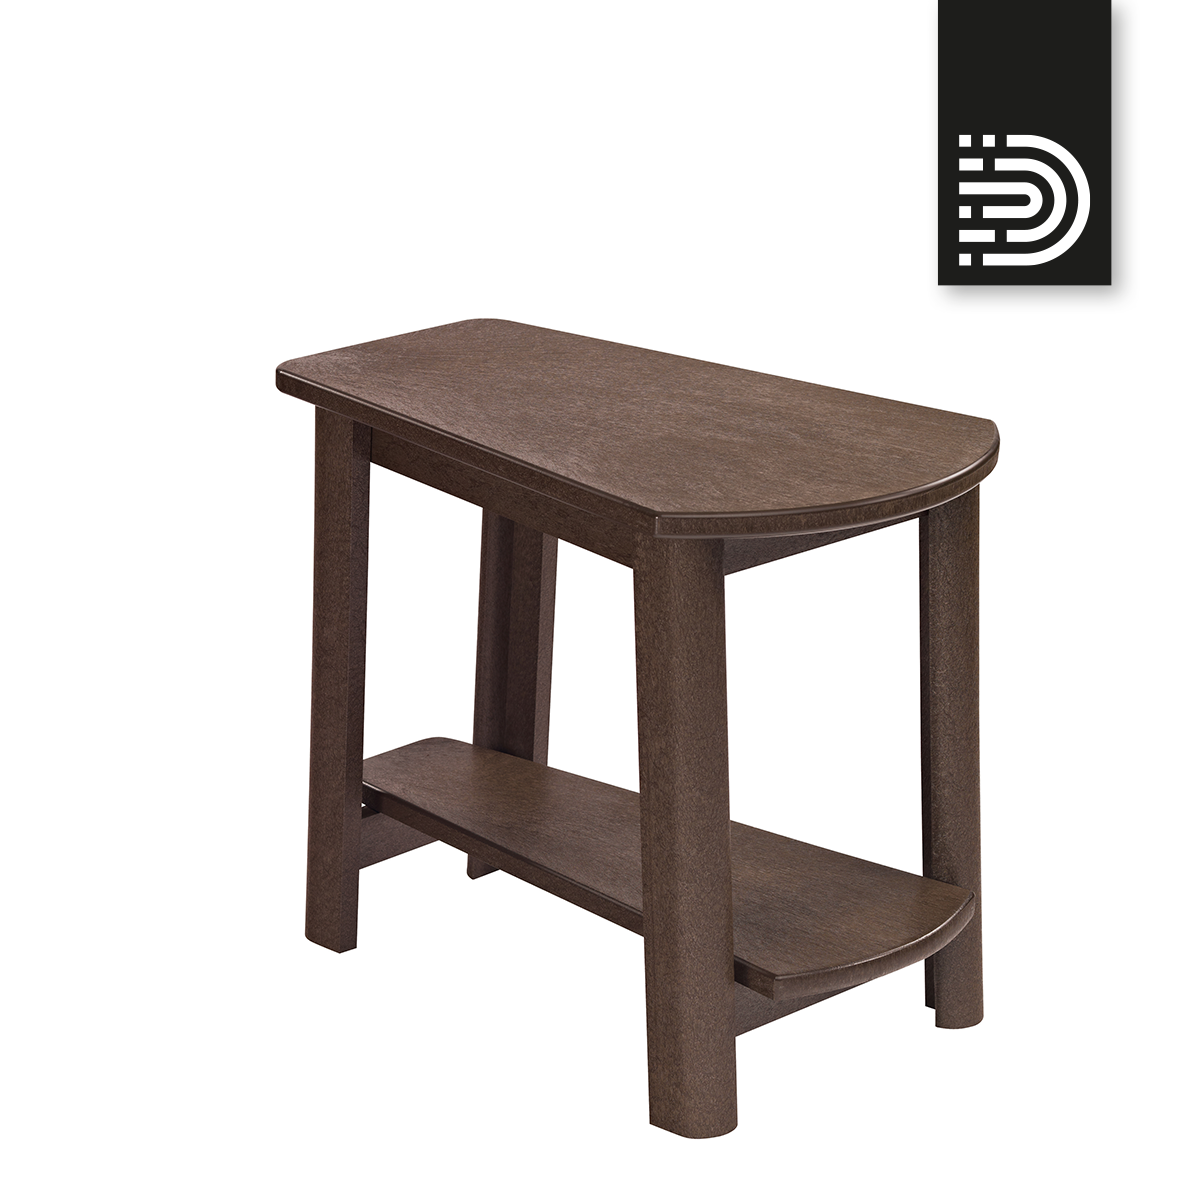 T04 Addy Side Table - chocolate 16